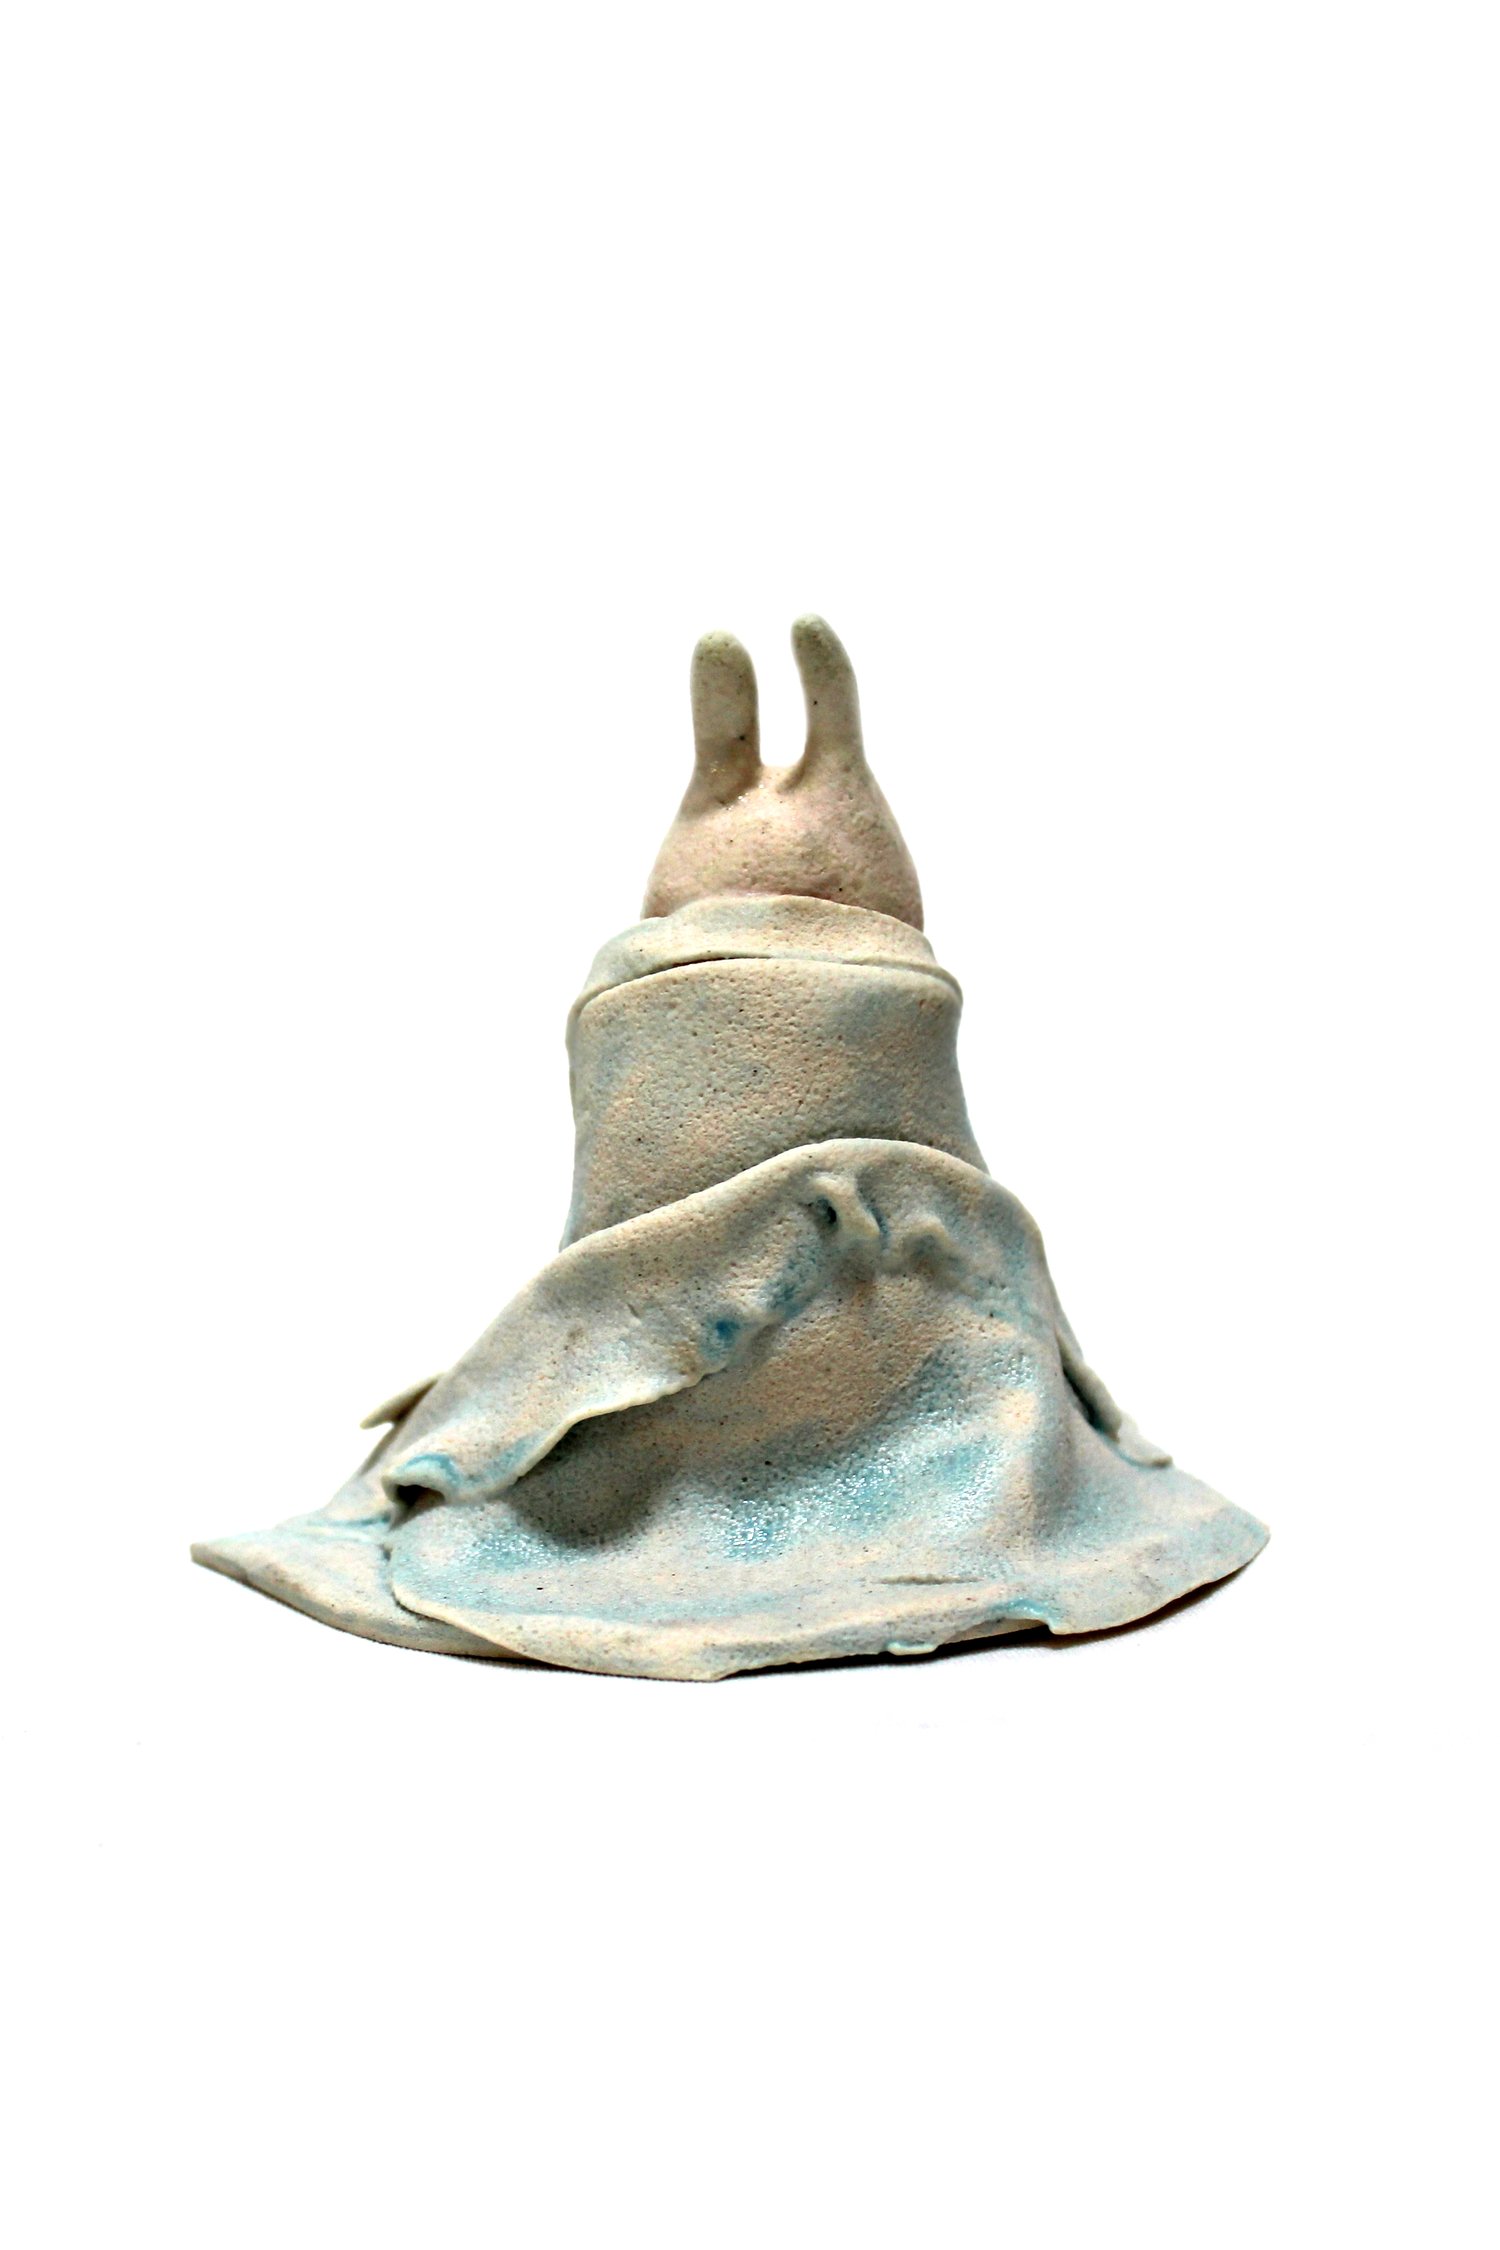 Image of 'Winter' - Pottery figure